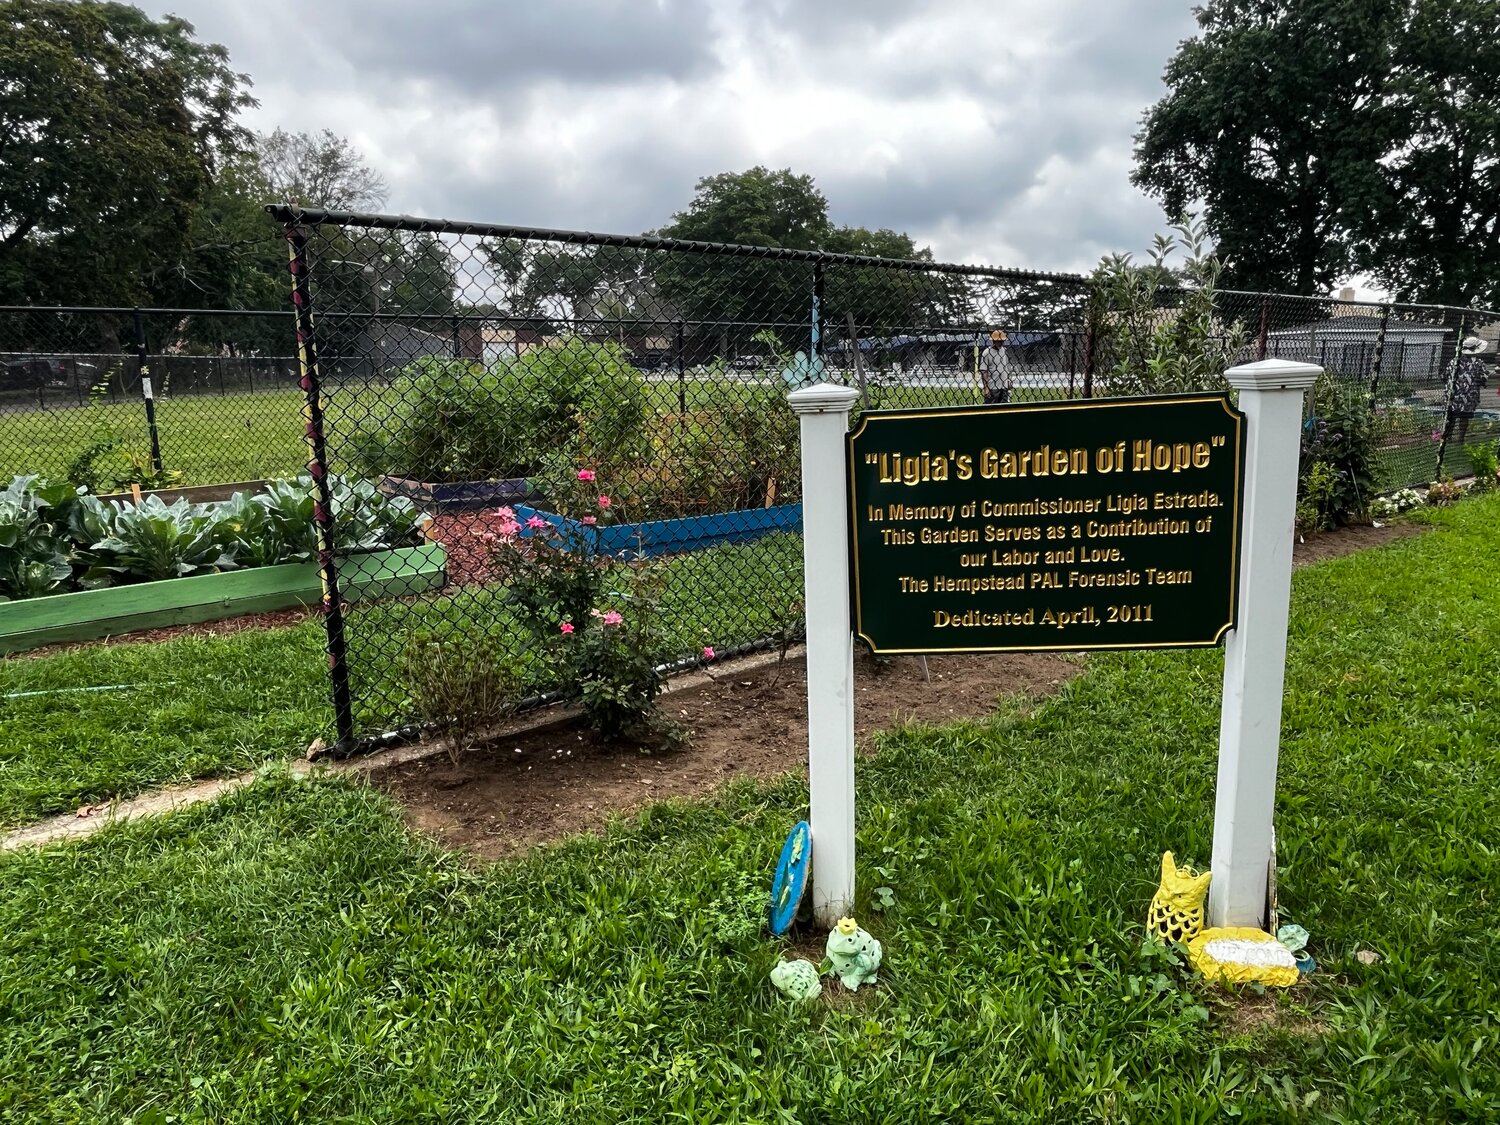 The sign welcoming all residents to Hempstead’s community garden, Ligia’s Garden of Hope, which was donated in 2011 in memory of the garden’s original commissioner, Ligia Estrada.